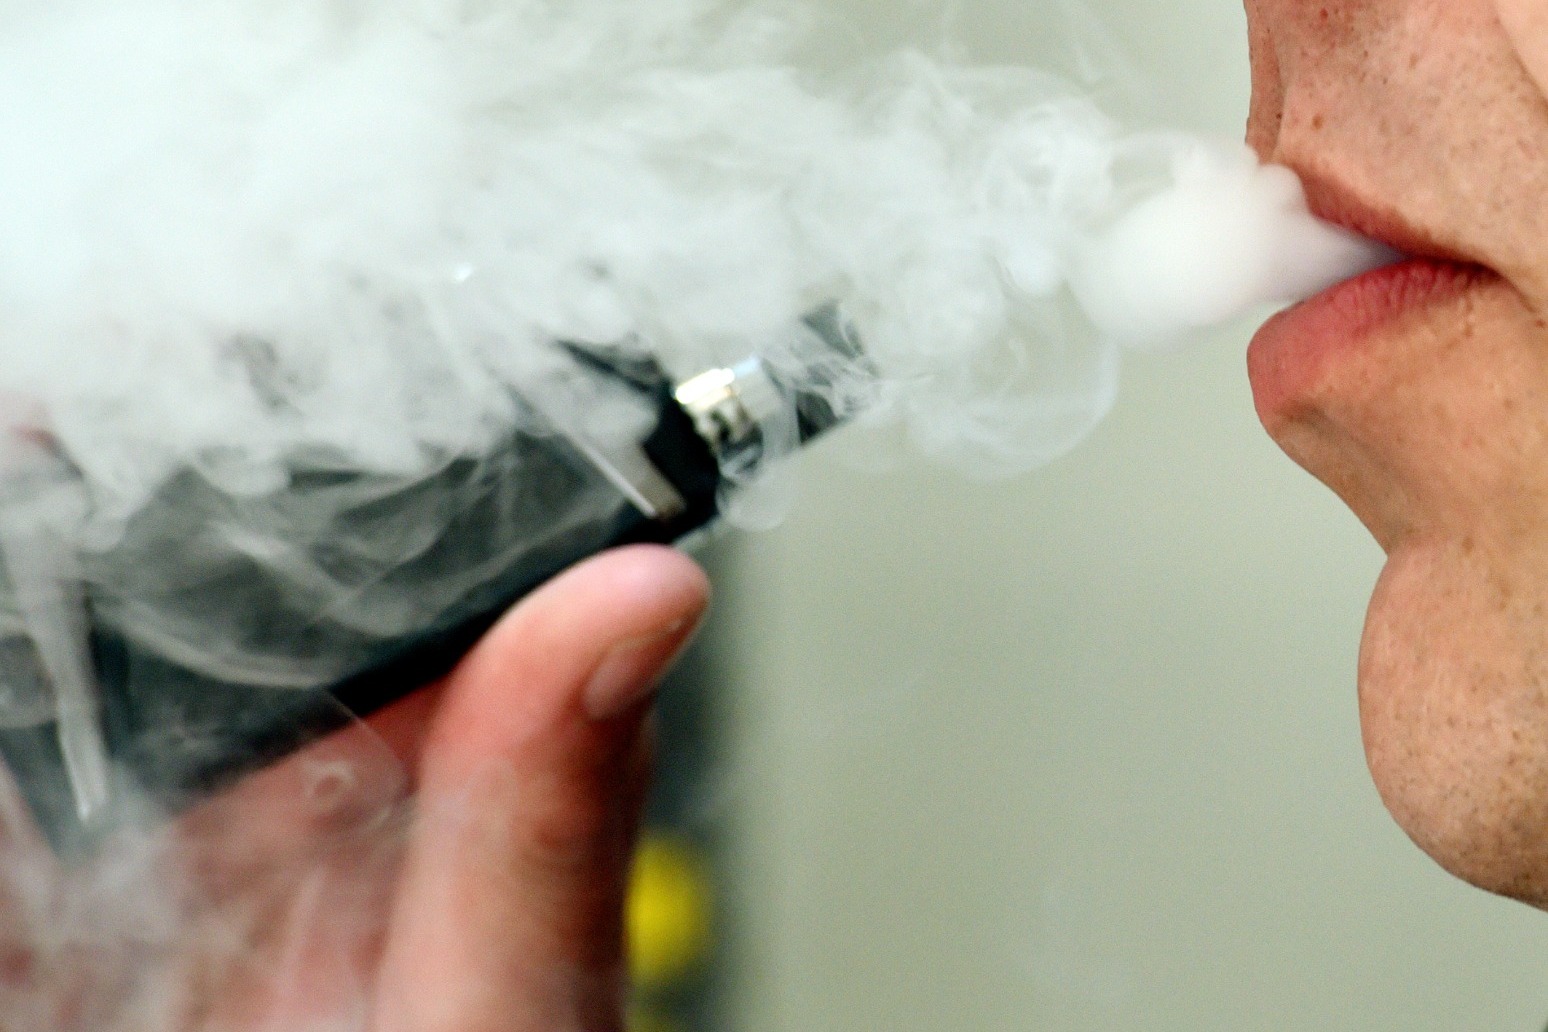 Ireland plans to introduce ‘essentially an outright ban’ on vapes being sold to children 